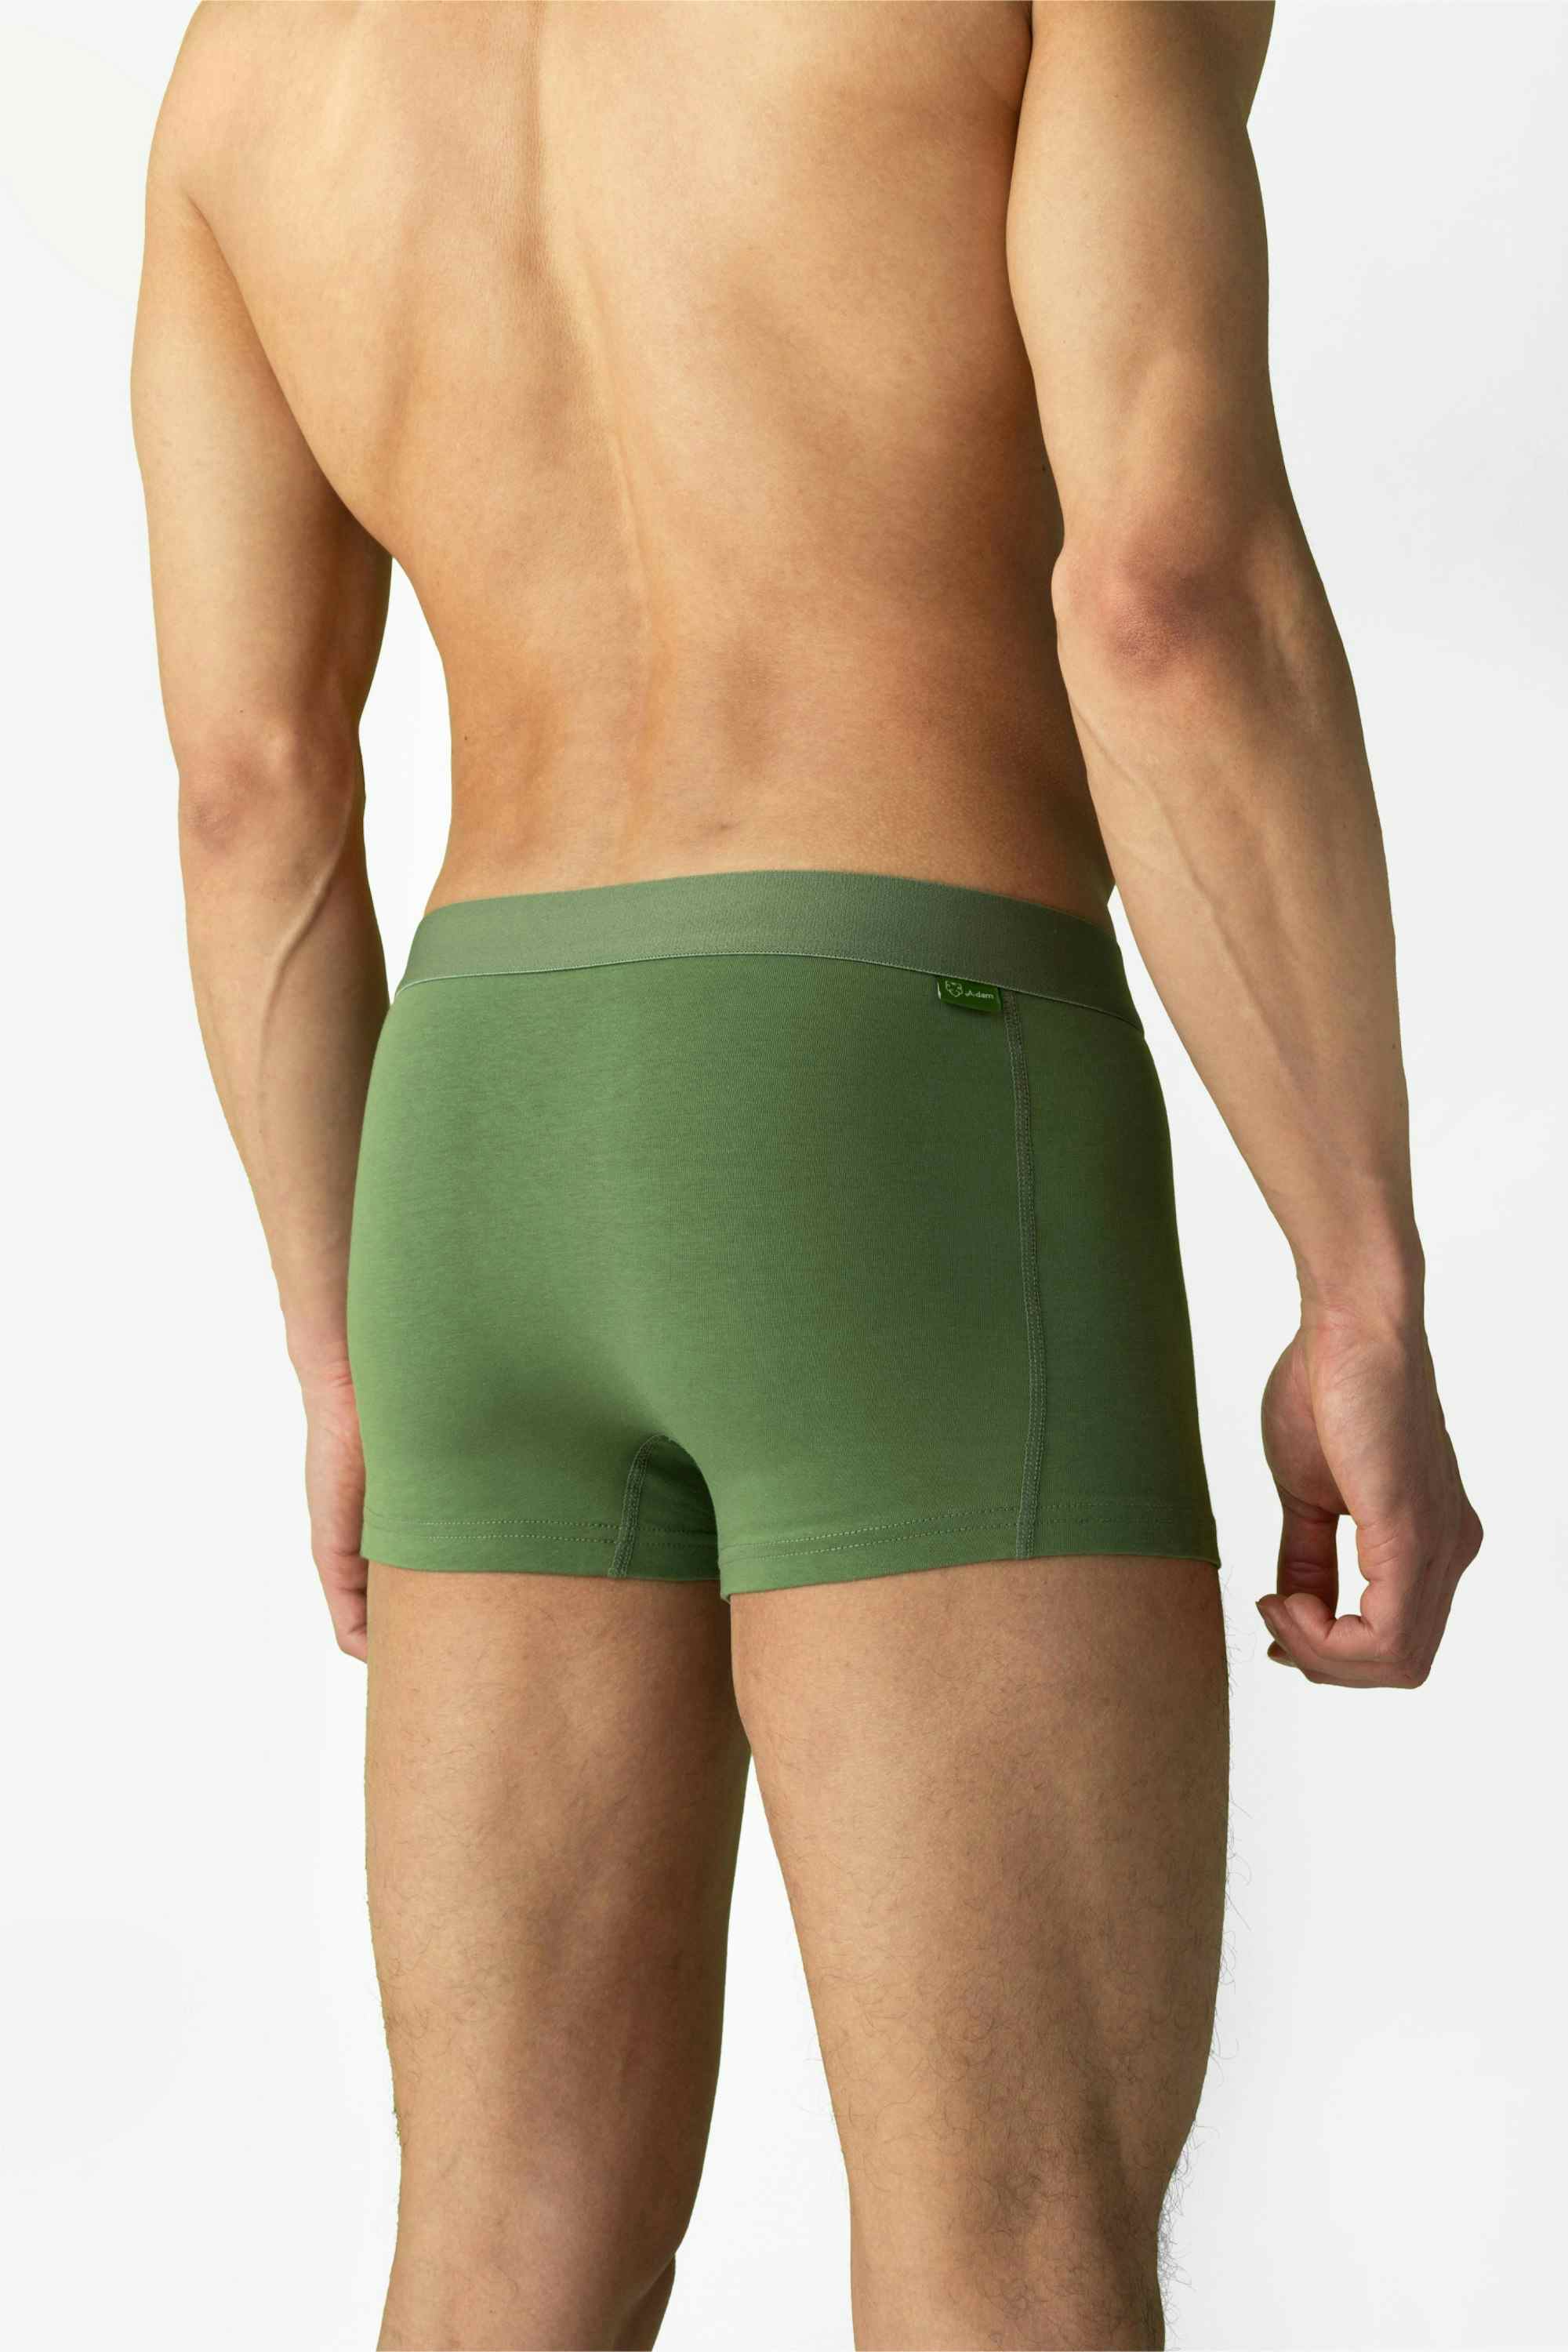 3xSolid Green Trunks